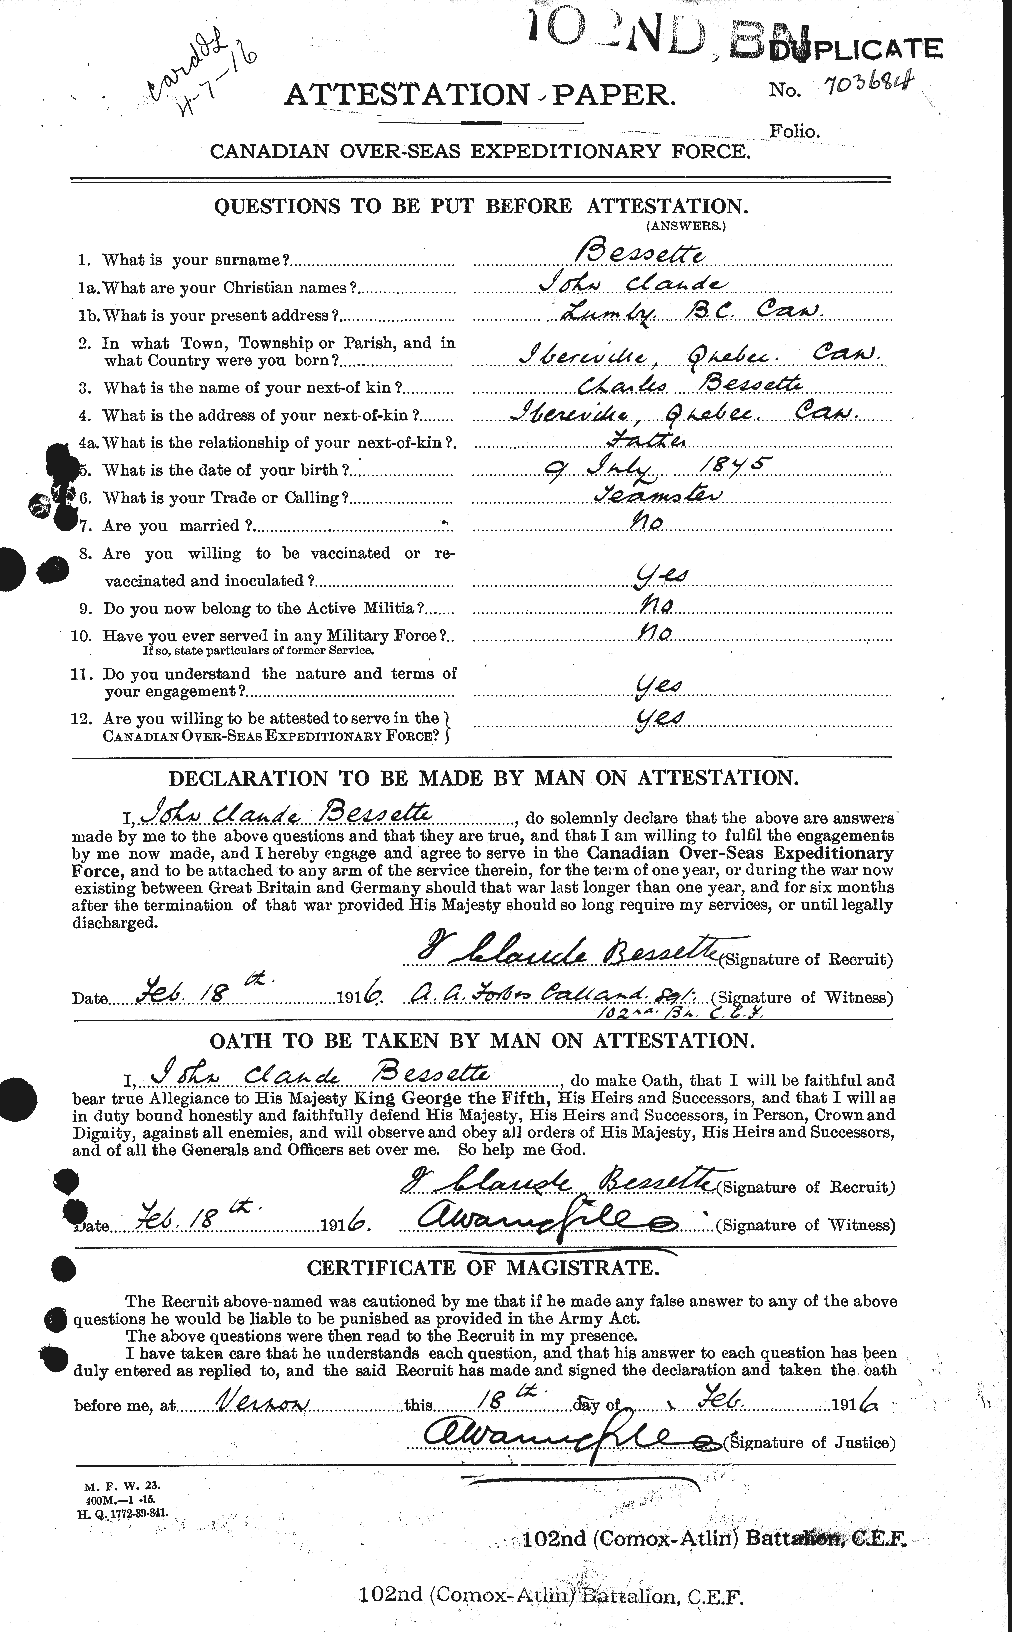 Personnel Records of the First World War - CEF 240173a